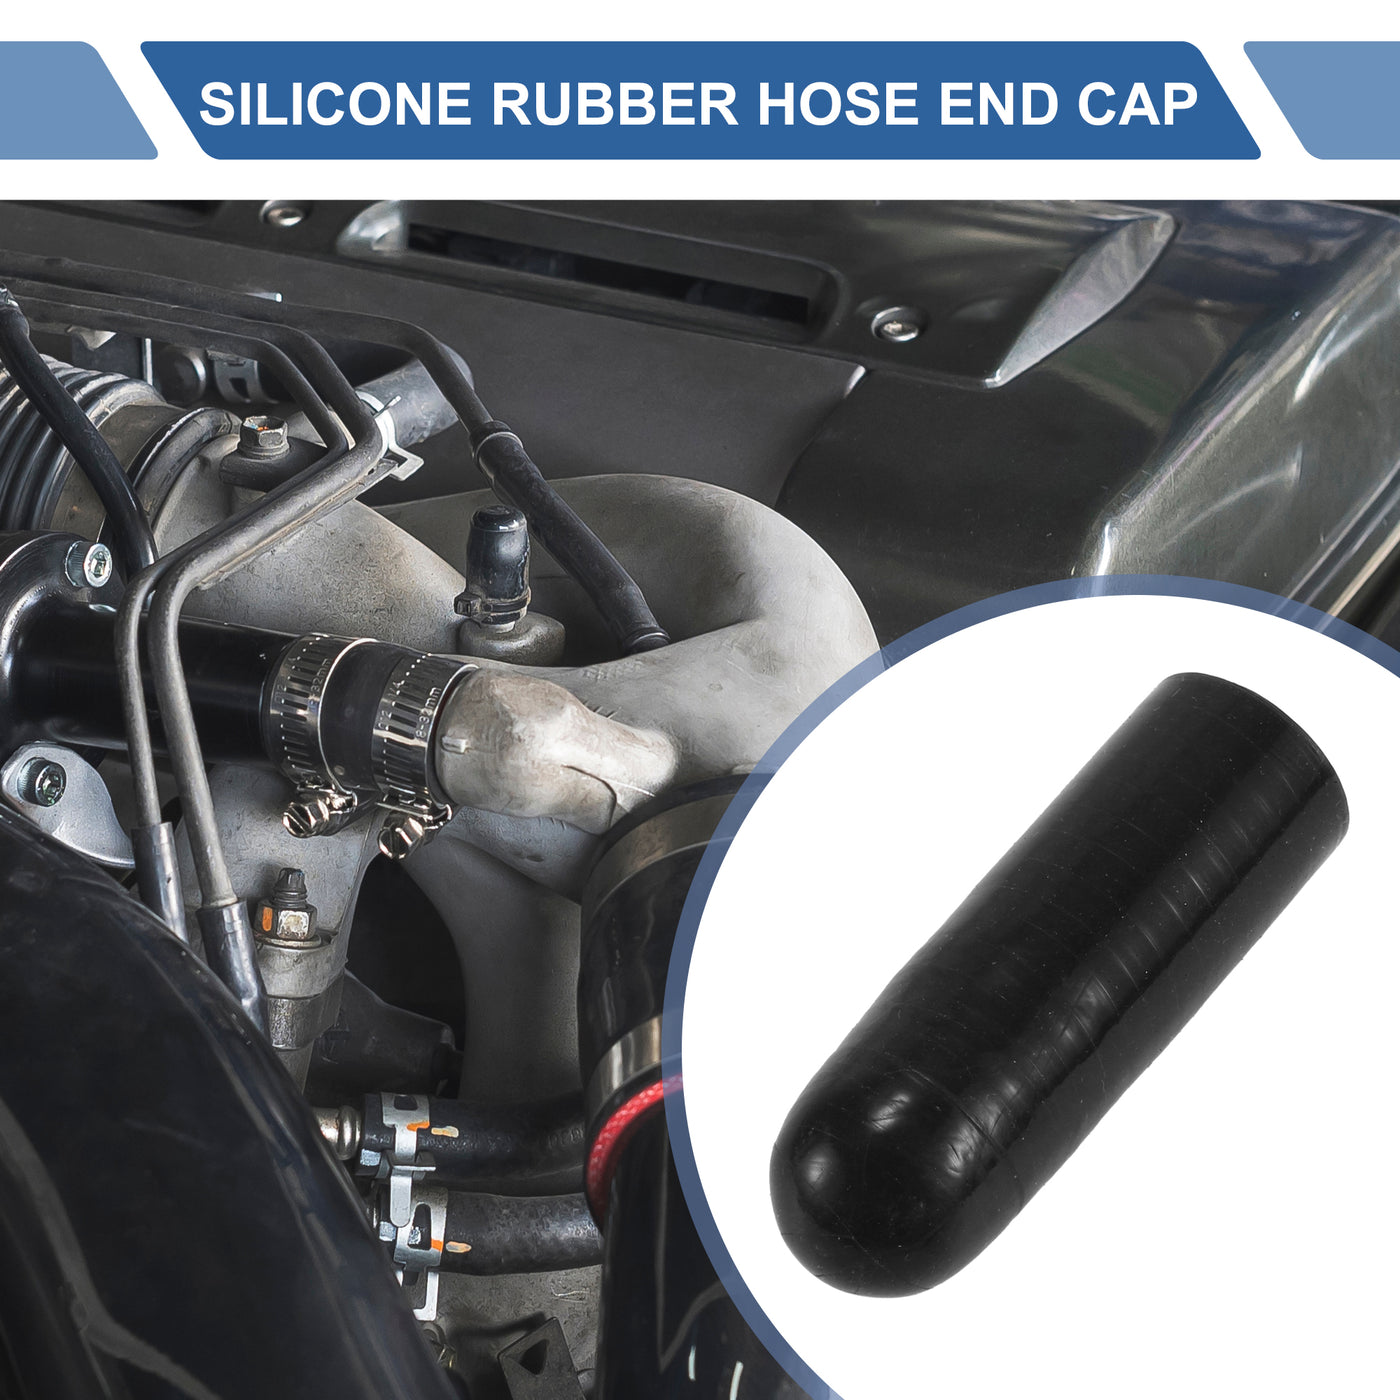 X AUTOHAUX 1 Pcs 60mm Length 16mm/0.63" ID Black Car Silicone Rubber Hose End Cap with Clamp Silicone Reinforced Blanking Cap for Bypass Tube Universal